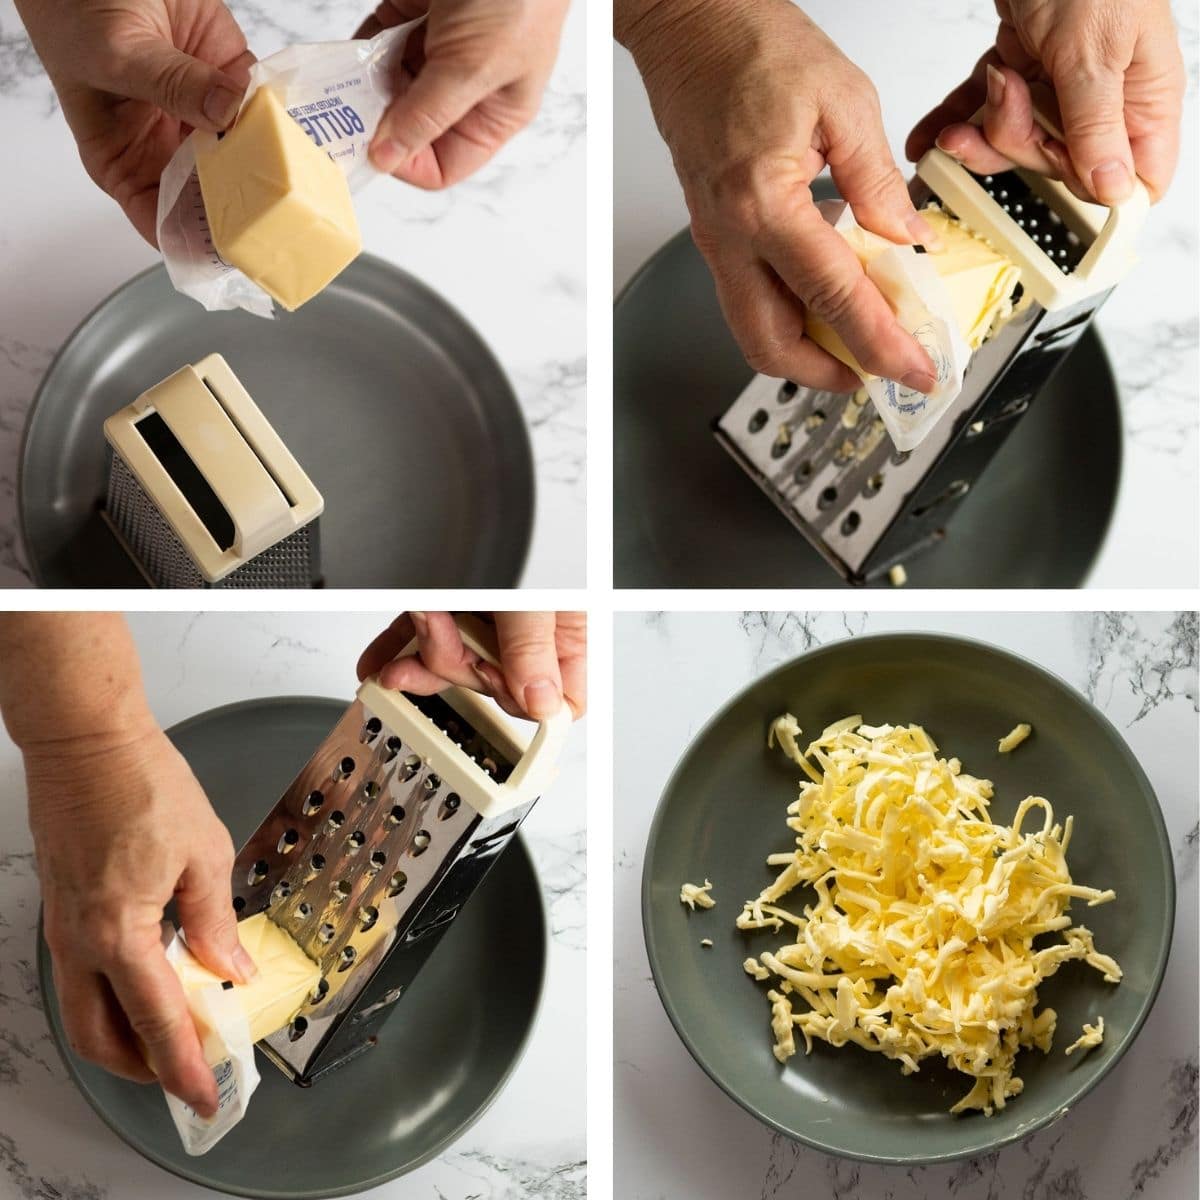 Hands shredding a stick of cold butter with a box grater.